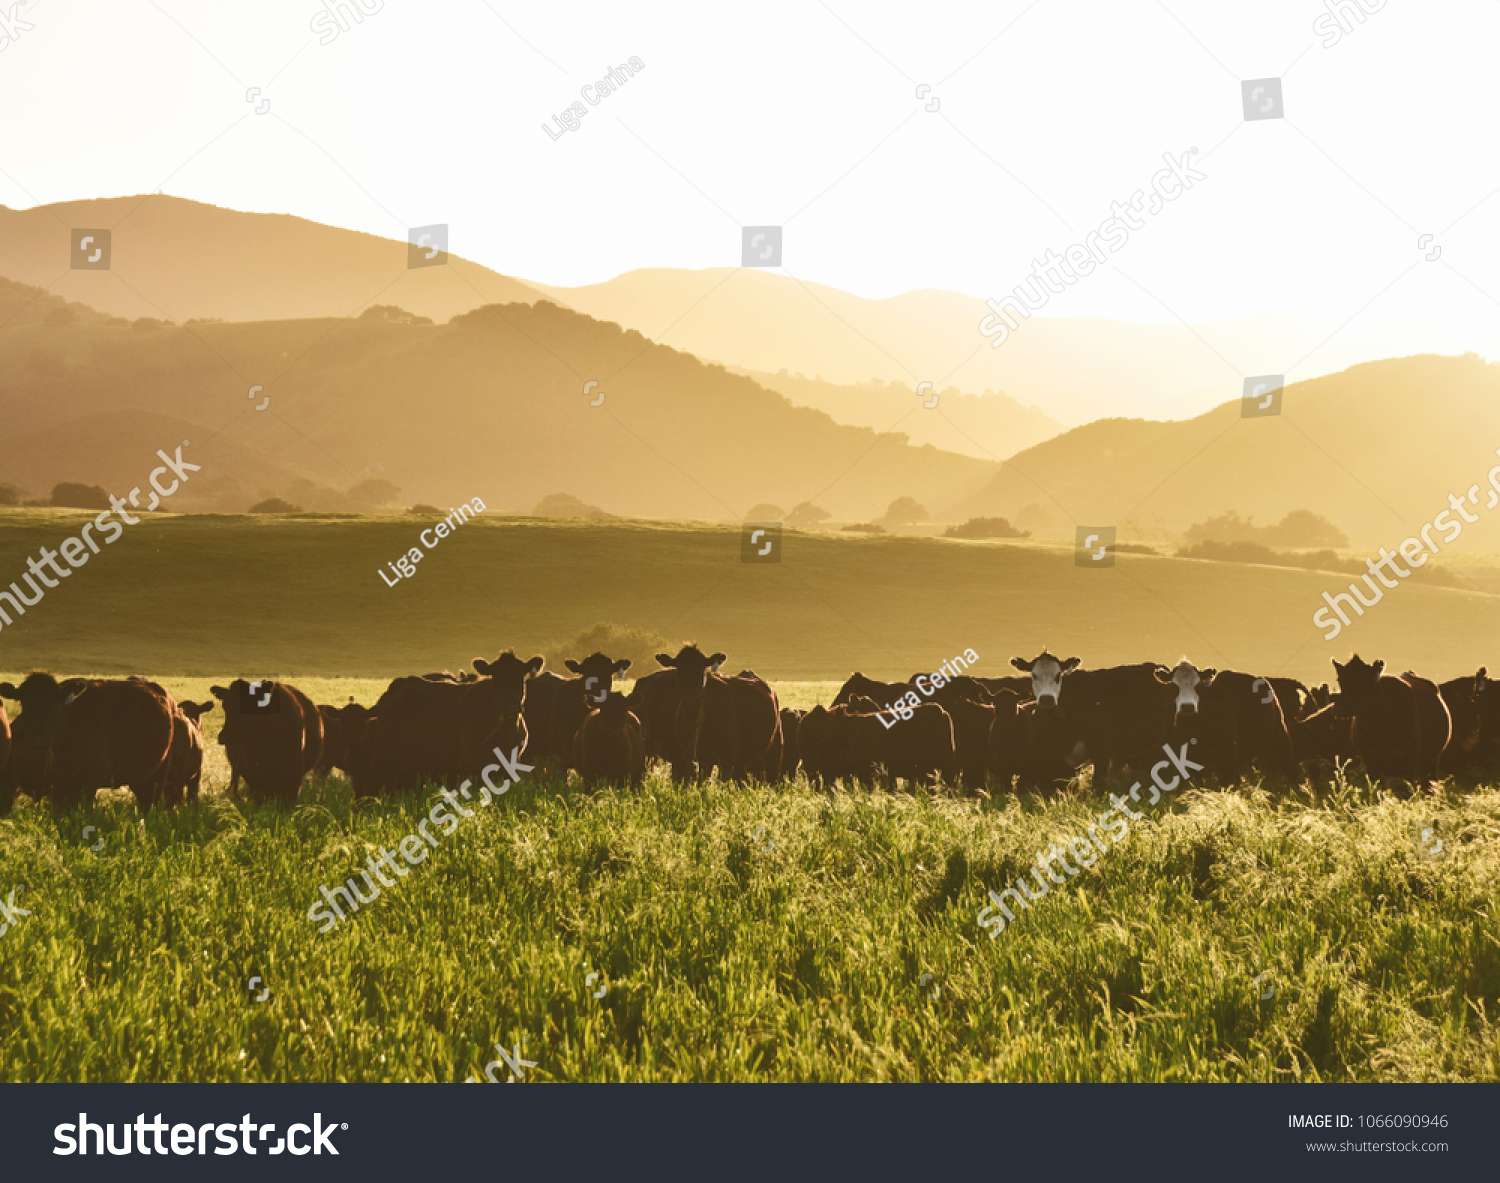 large livestock of cows in a long grass meadow field during sunset against layers of different height mountains in the background. Summertime. #1066090946